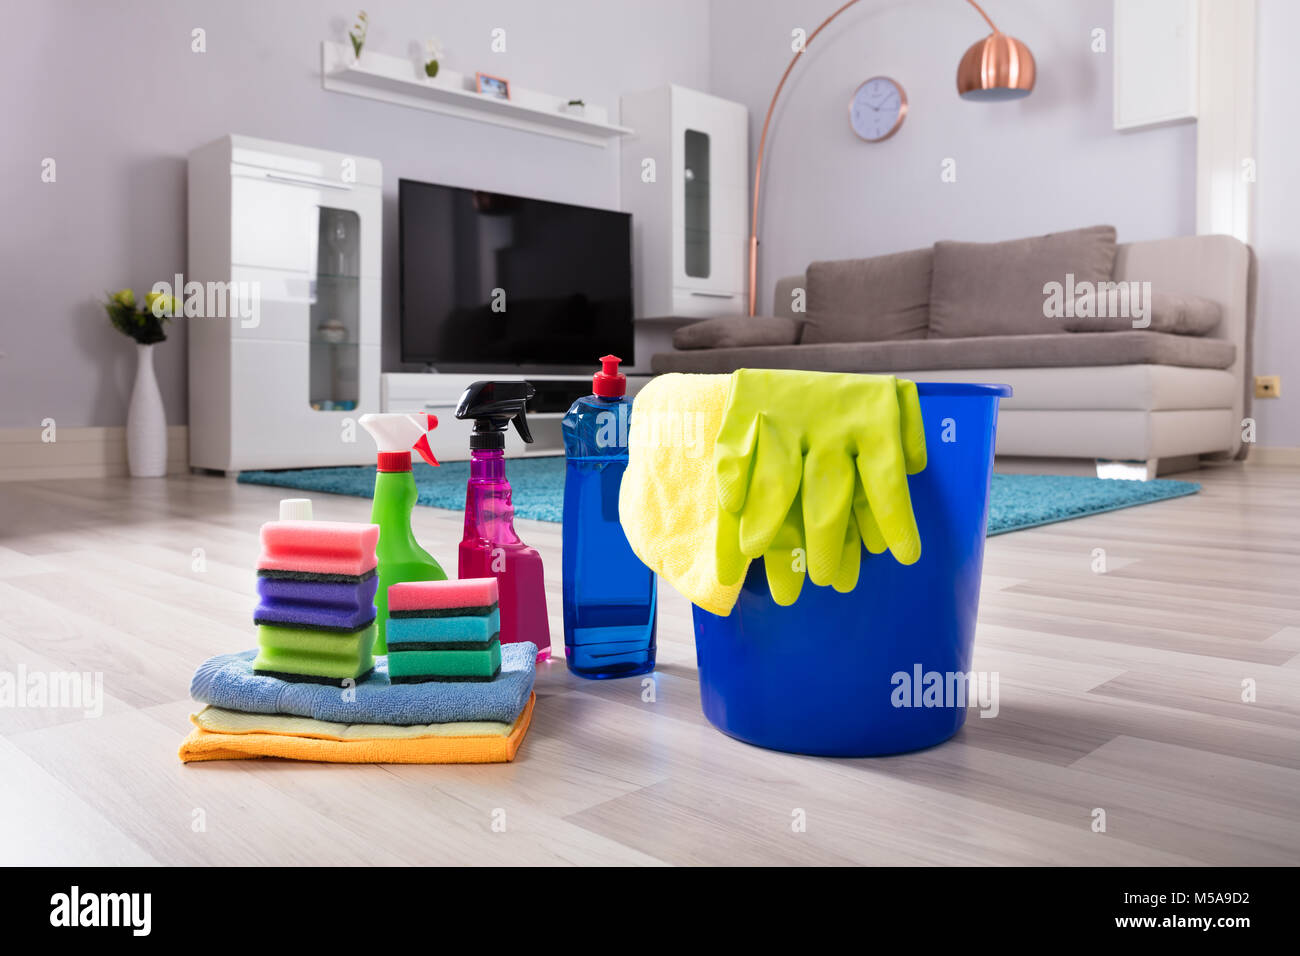 Blue Colored Bucket With House Cleaning Products On Hardwood Floor At Home Stock Photo